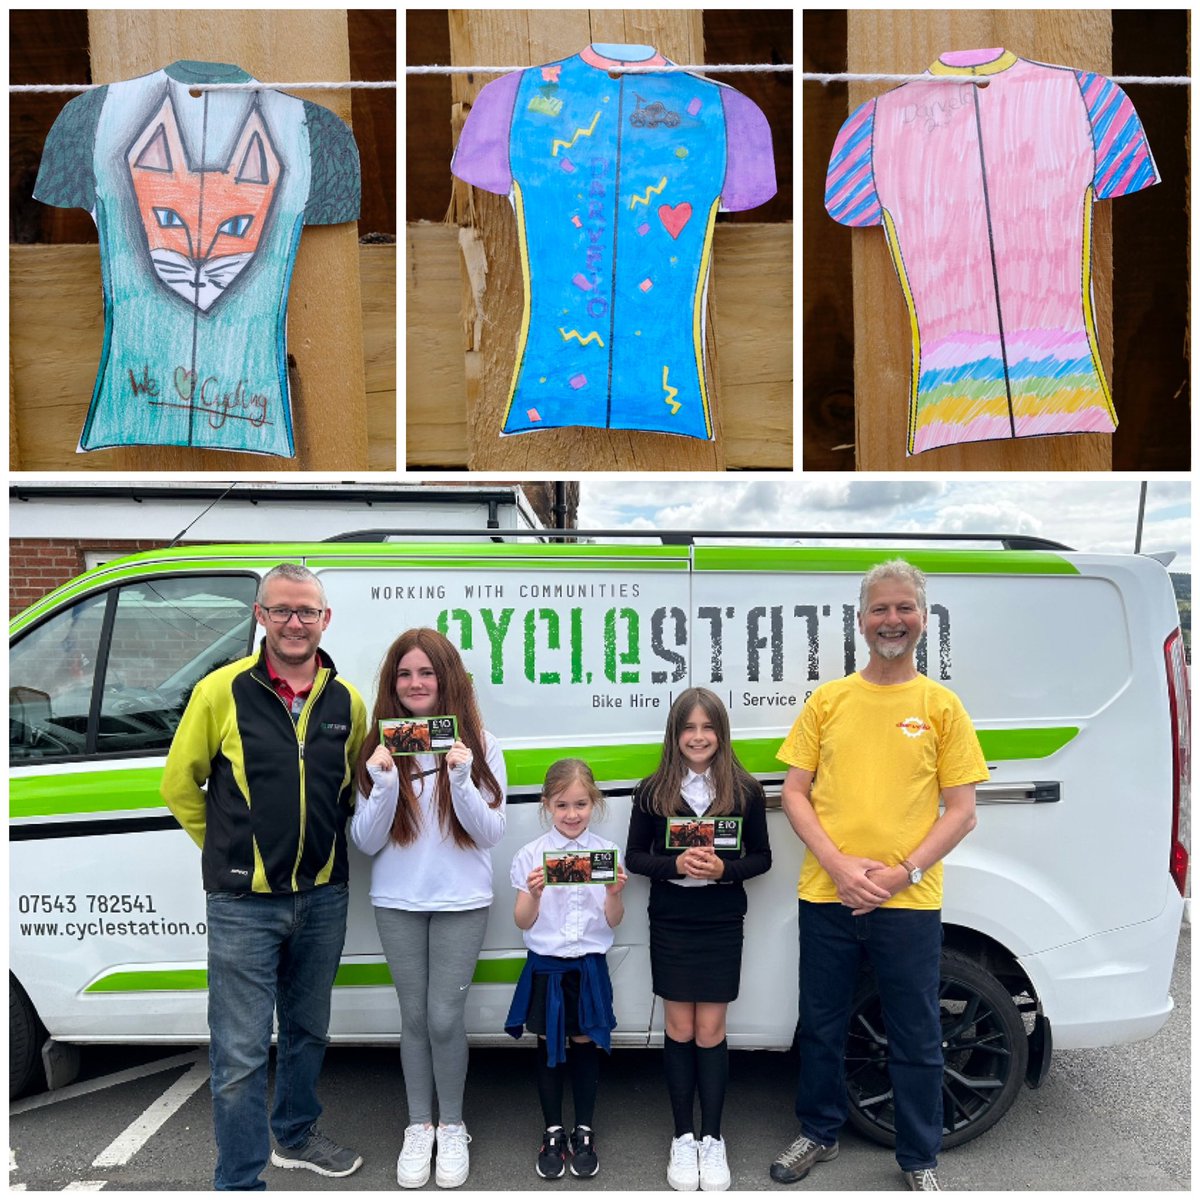 Darvelo design a Cycling Jersey !! Well done @eacDarvelPS Eilidh, P6 in 1st (£50), Danni Lee P7 in 2nd (£30) and Ivy P4 in 3rd (£20). The winning designs expertly chosen by Chris Sanderson, from @circularcomscot @EastAyrshire @CyclingWorlds @CyclingScotland @CyclingUKScot